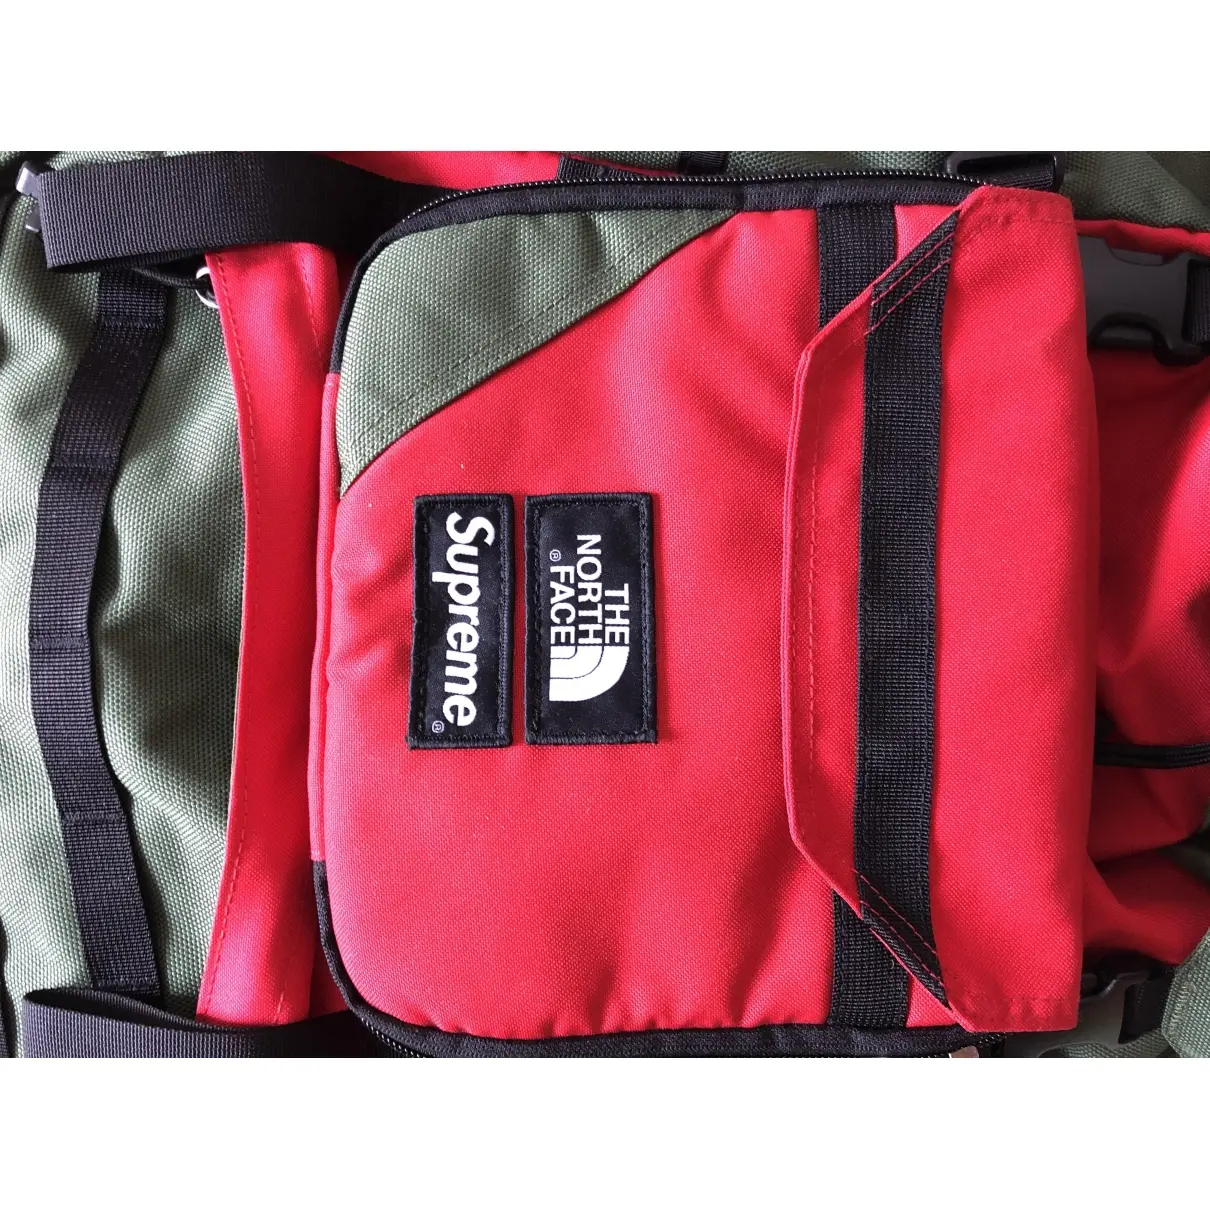 Buy Supreme x The North Face Bag online